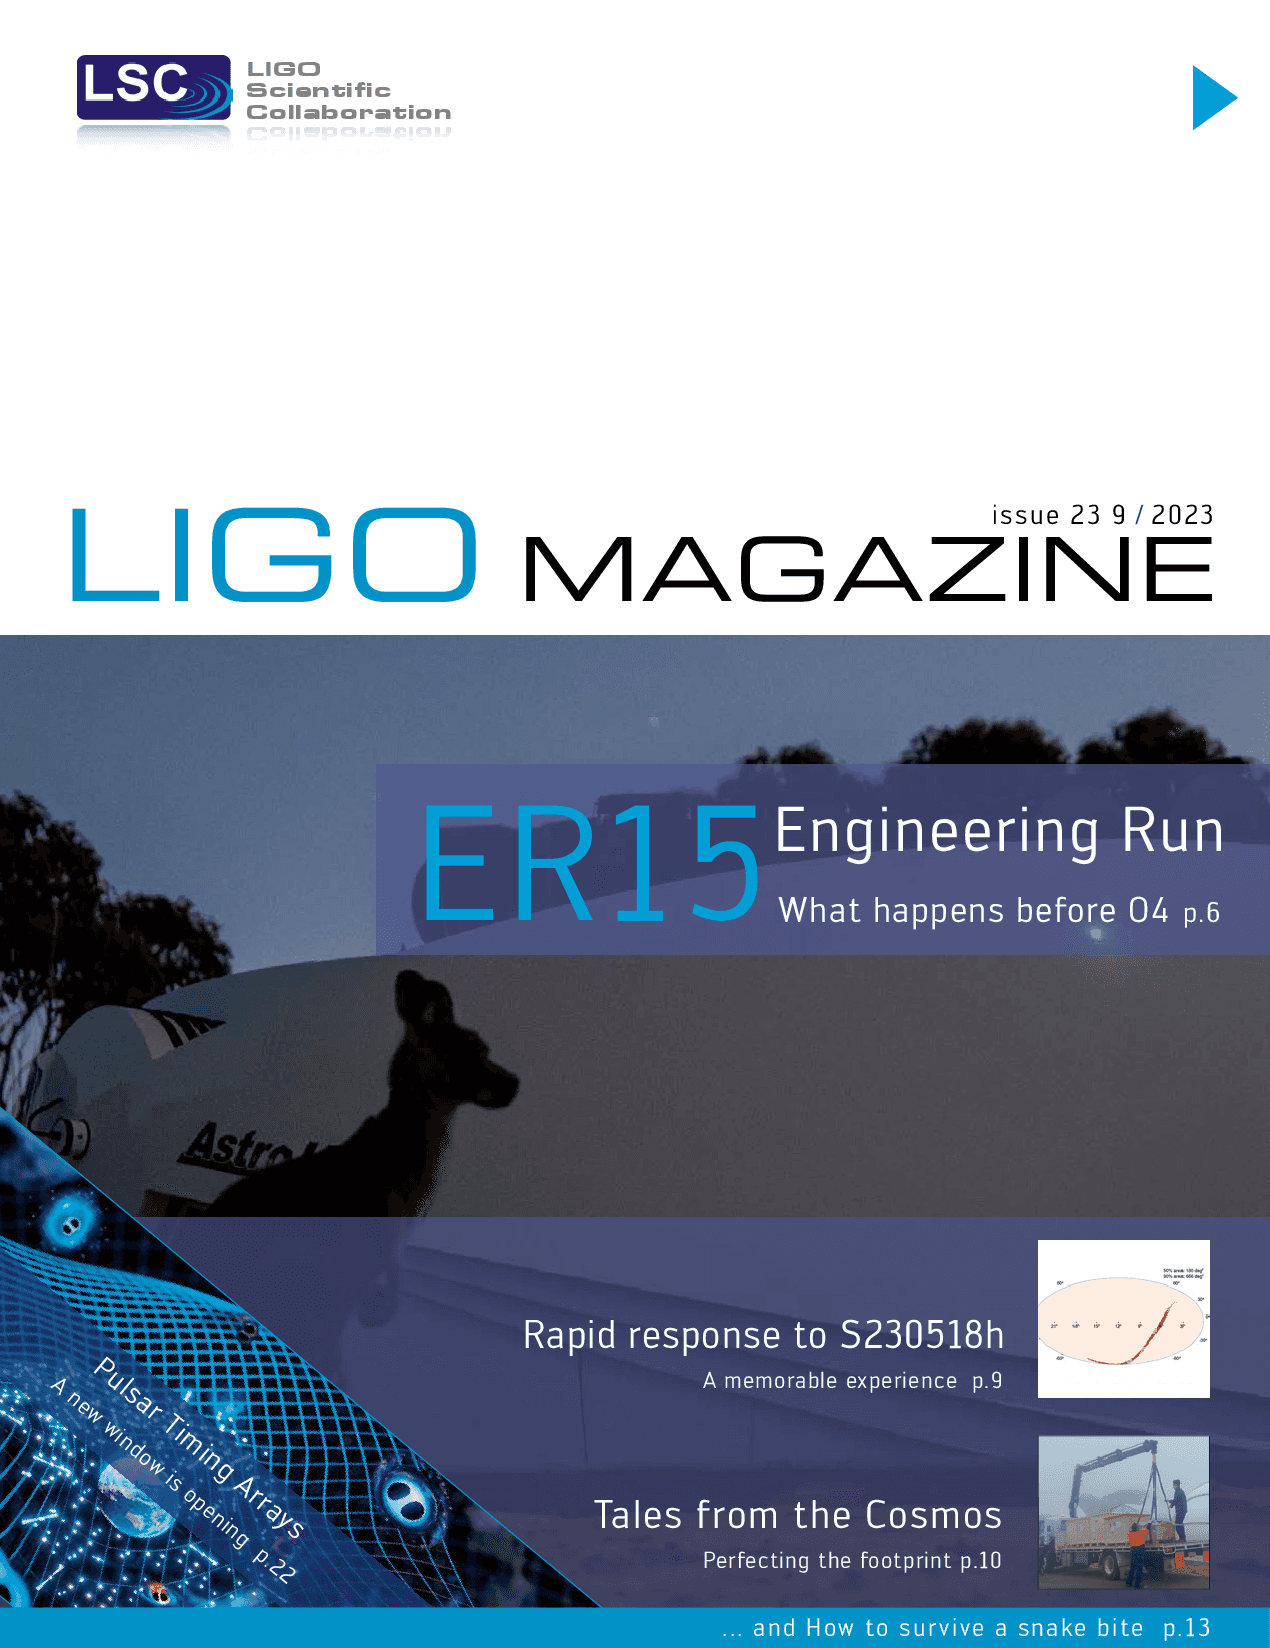 News-Image 7 of: New LIGO Magazine Issue 23 is out